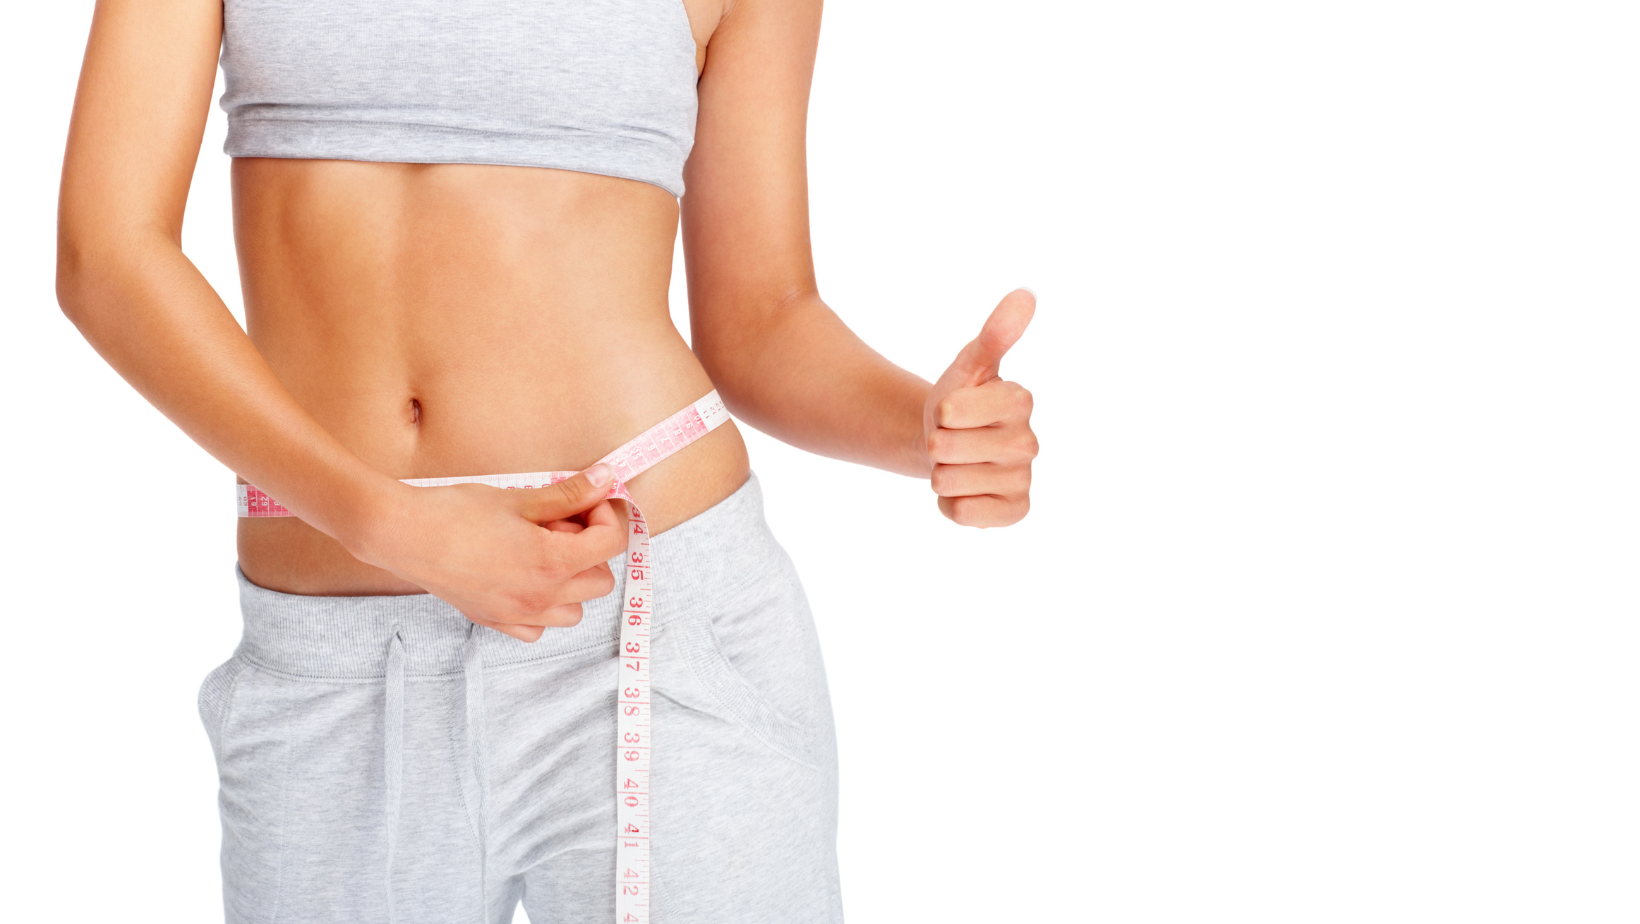 women with flat belly holding measuring tape. 